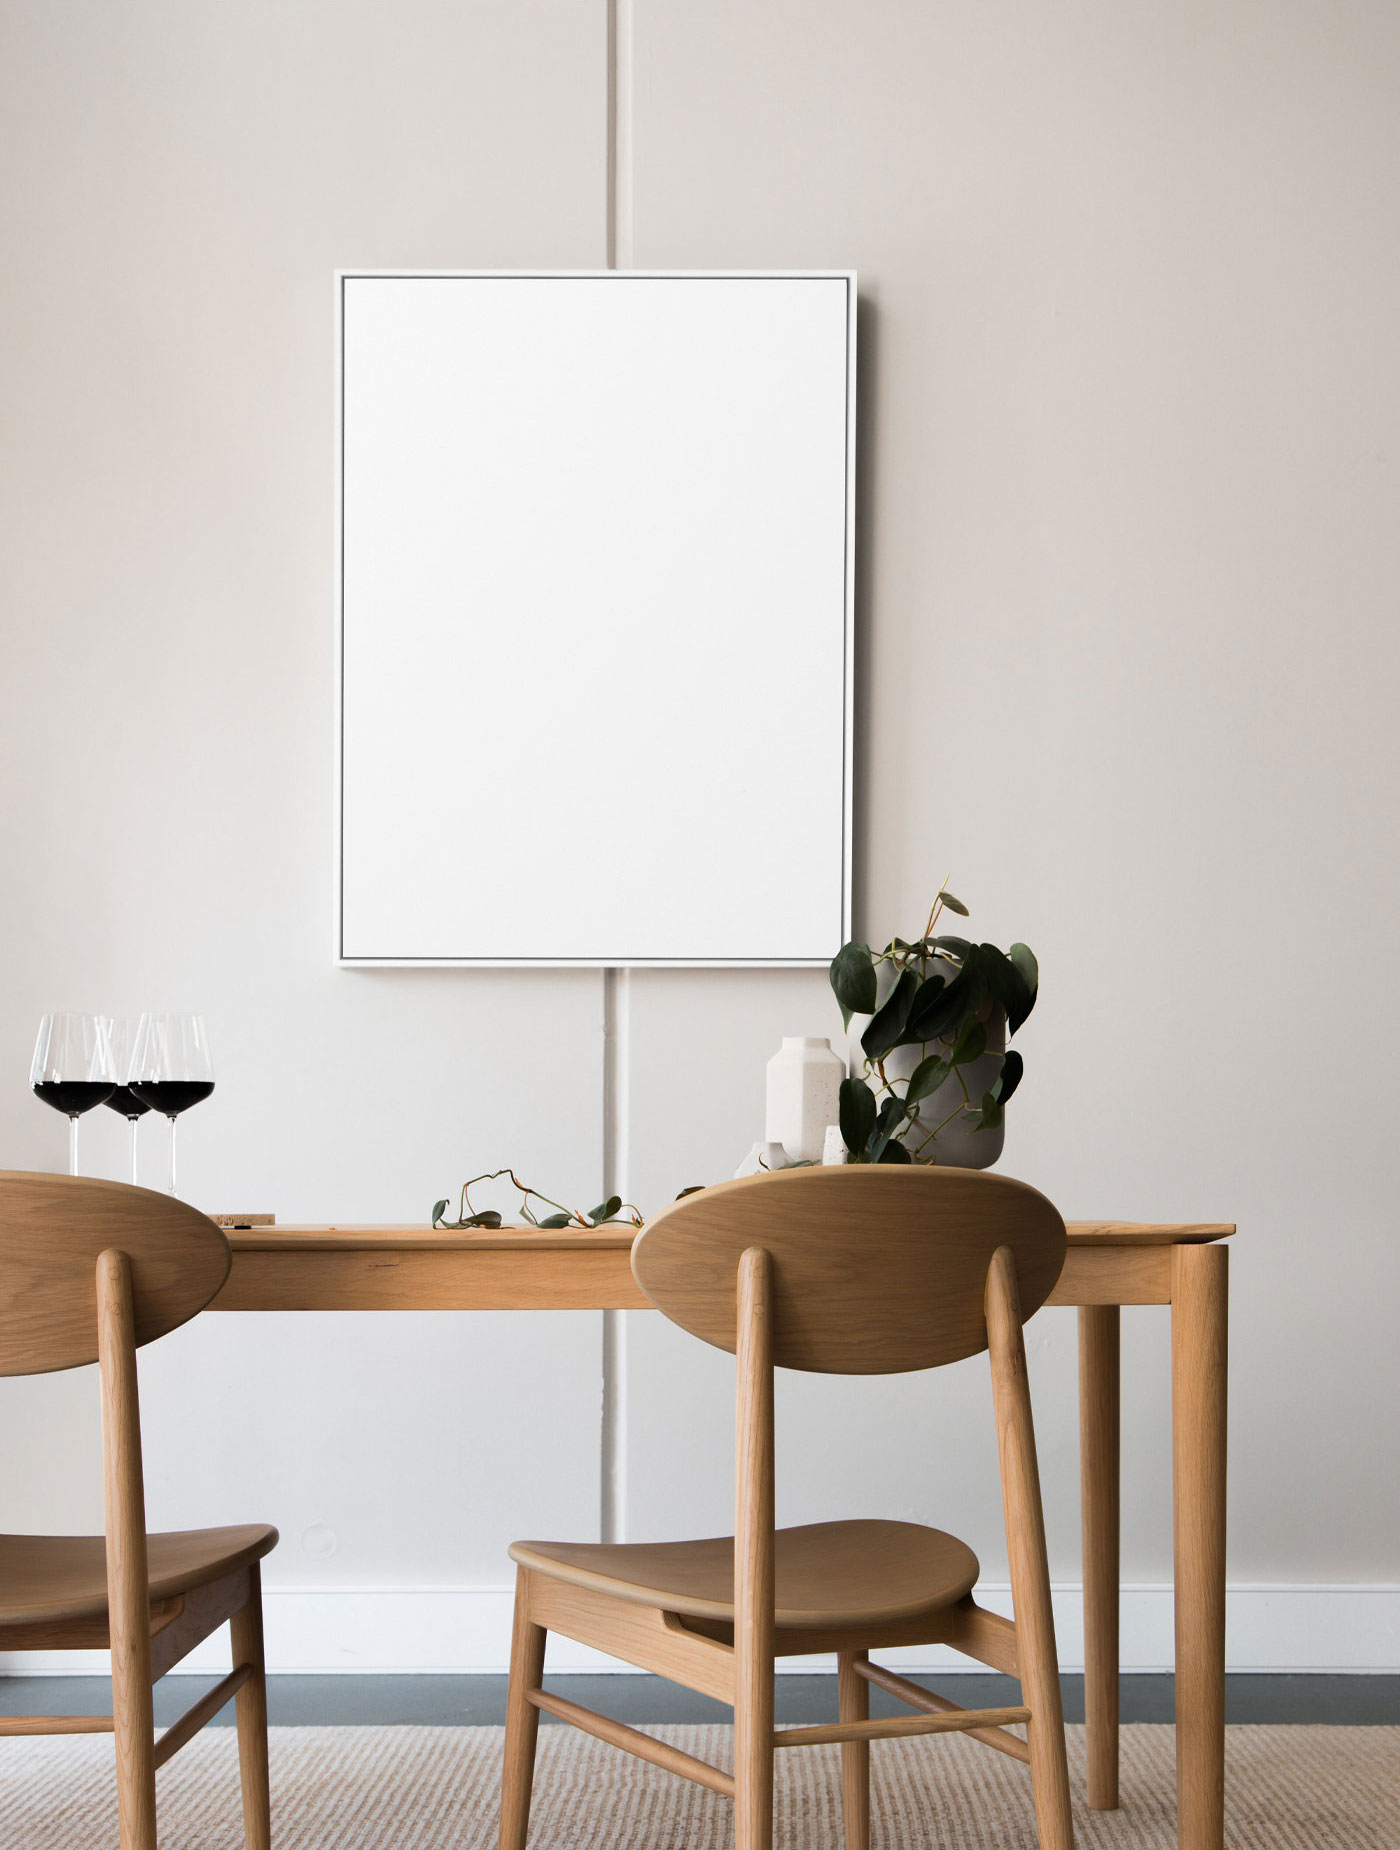 Front View of Hanged Vertical Poster Mockup in Dining Room FREE PSD